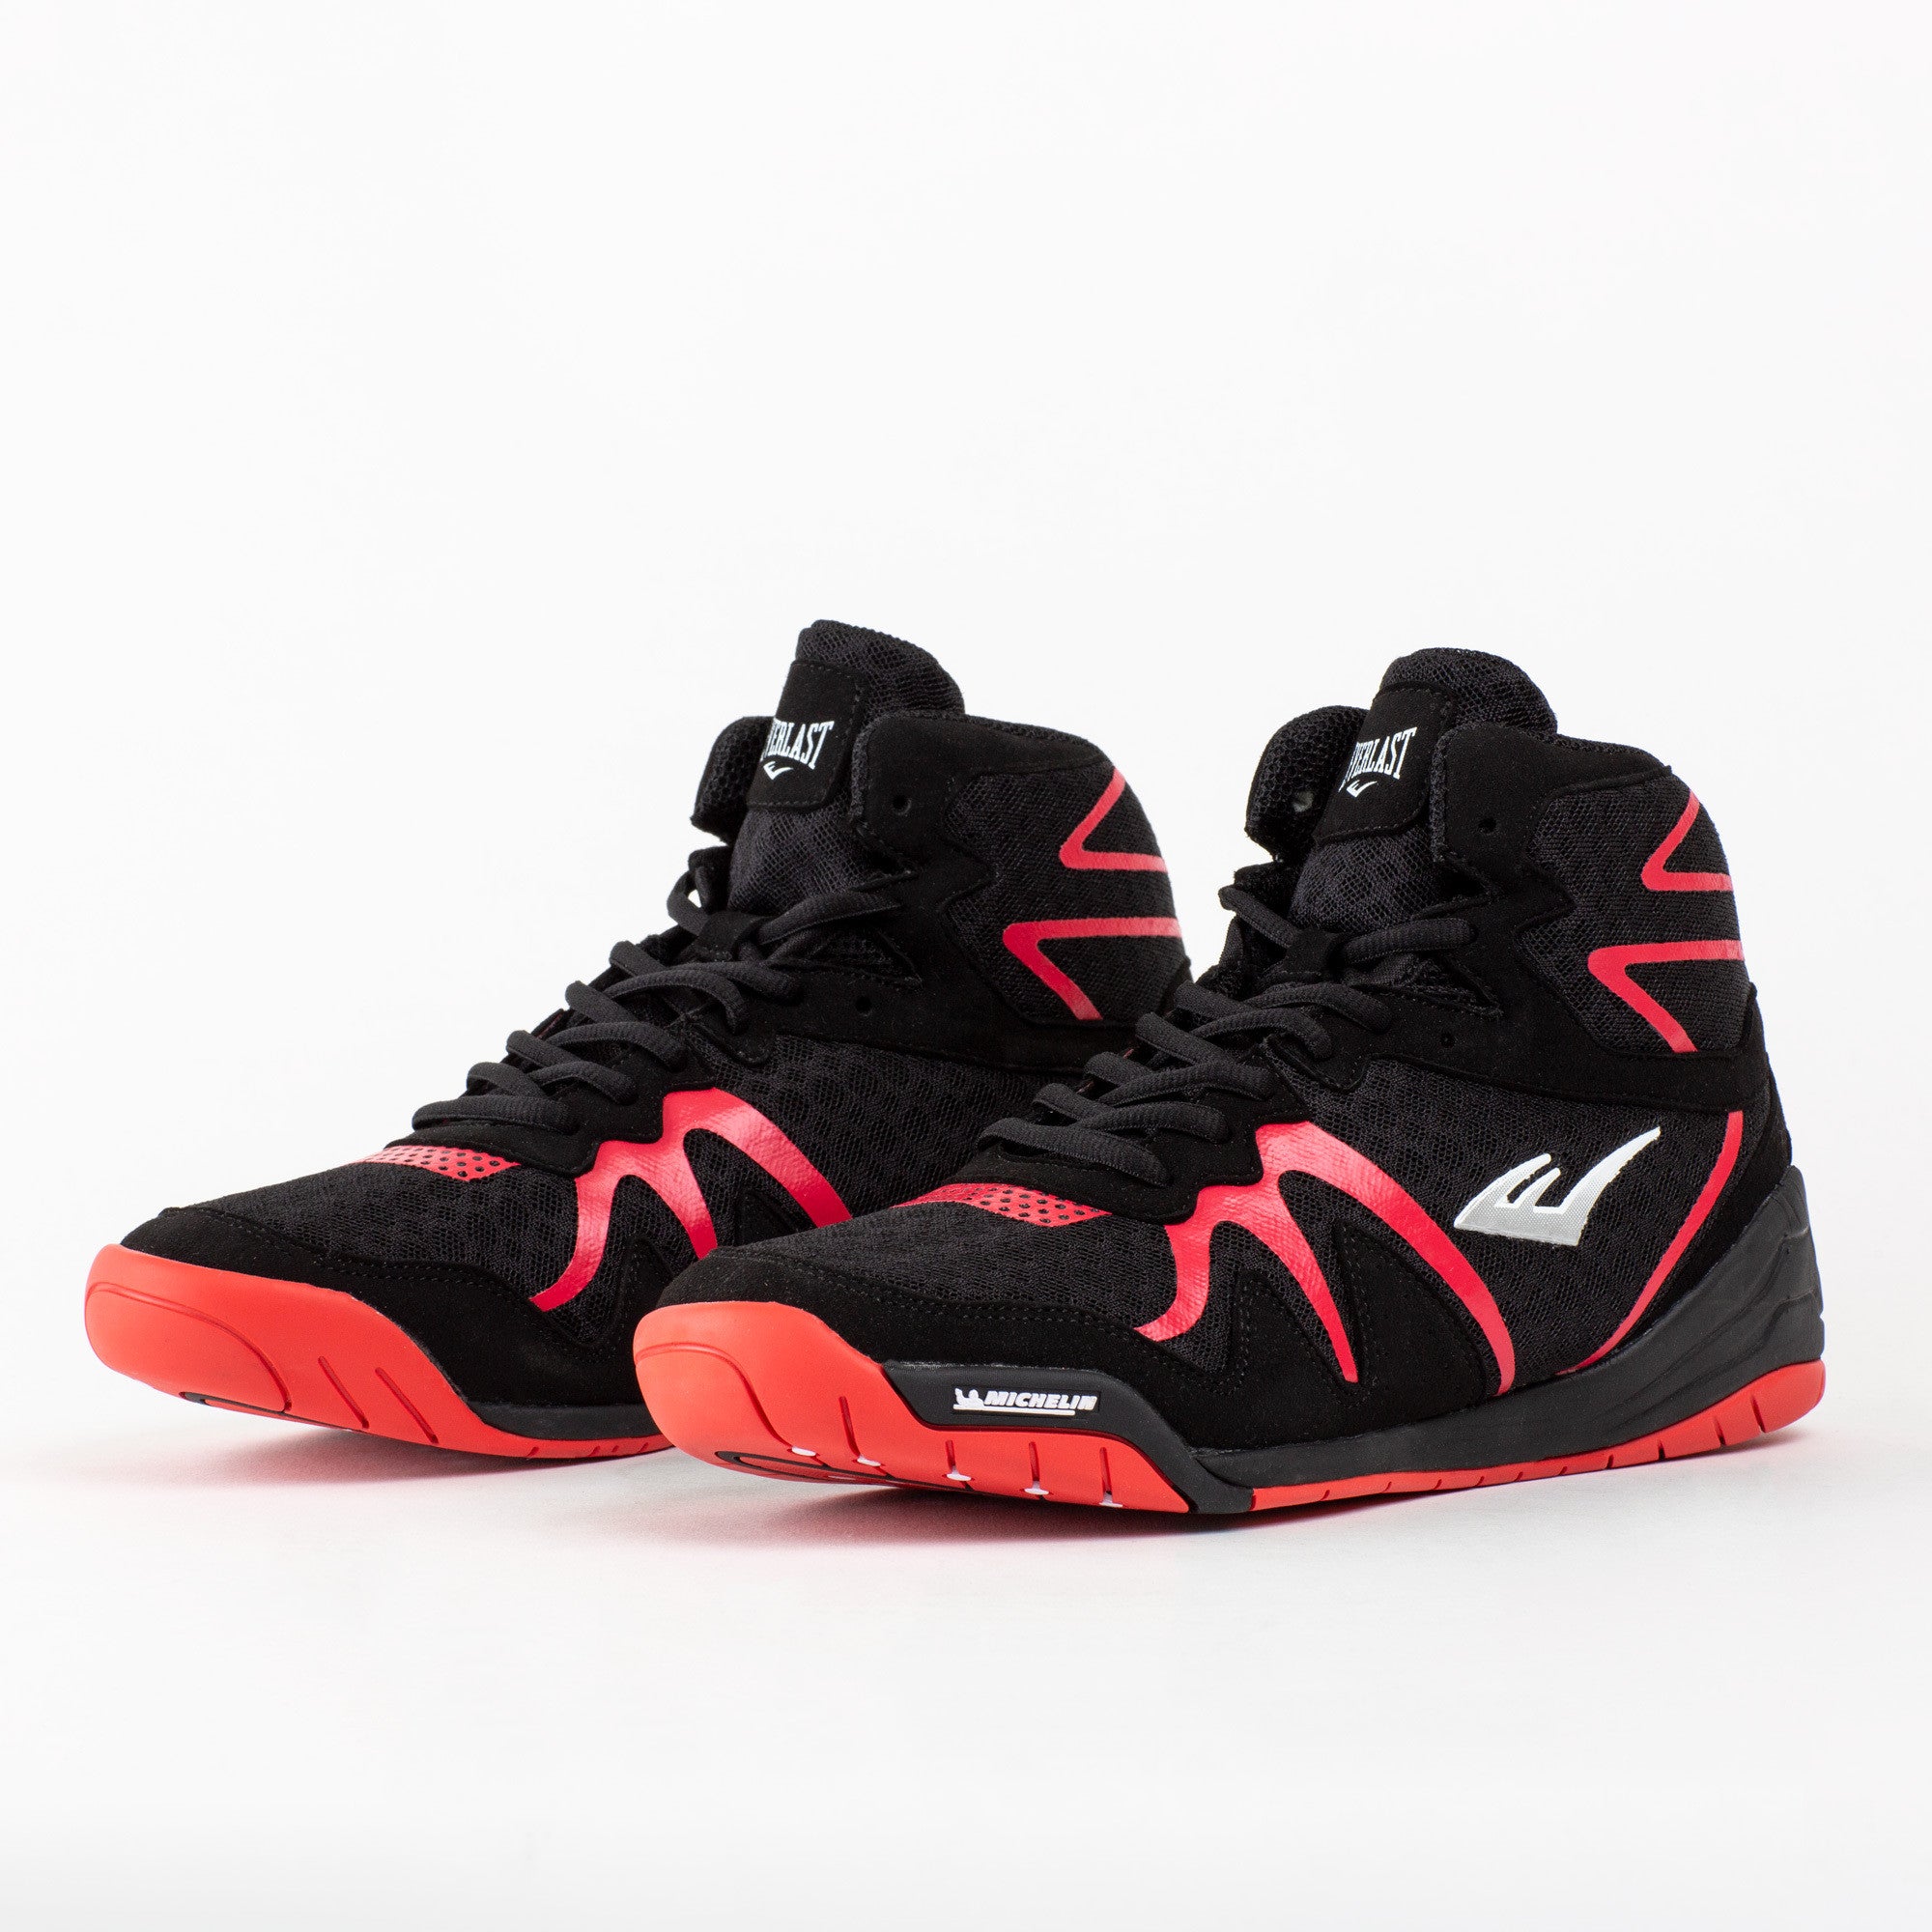 Lonsdale Boxing Shoes Footwear Footgear Lo Top LBSL from